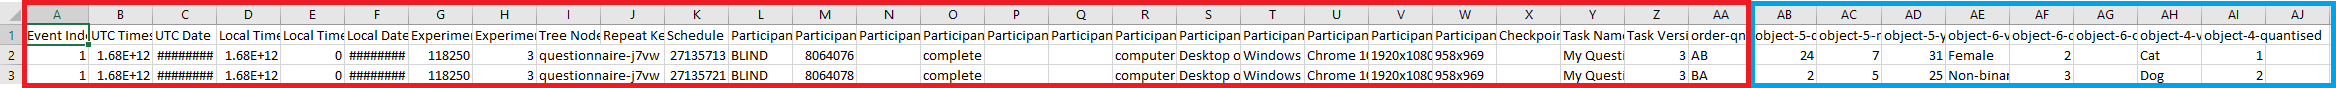 Screenshot of MS Excel, columns A-AA are highlighted in red, and columns AB-AI are highlighted in blue.